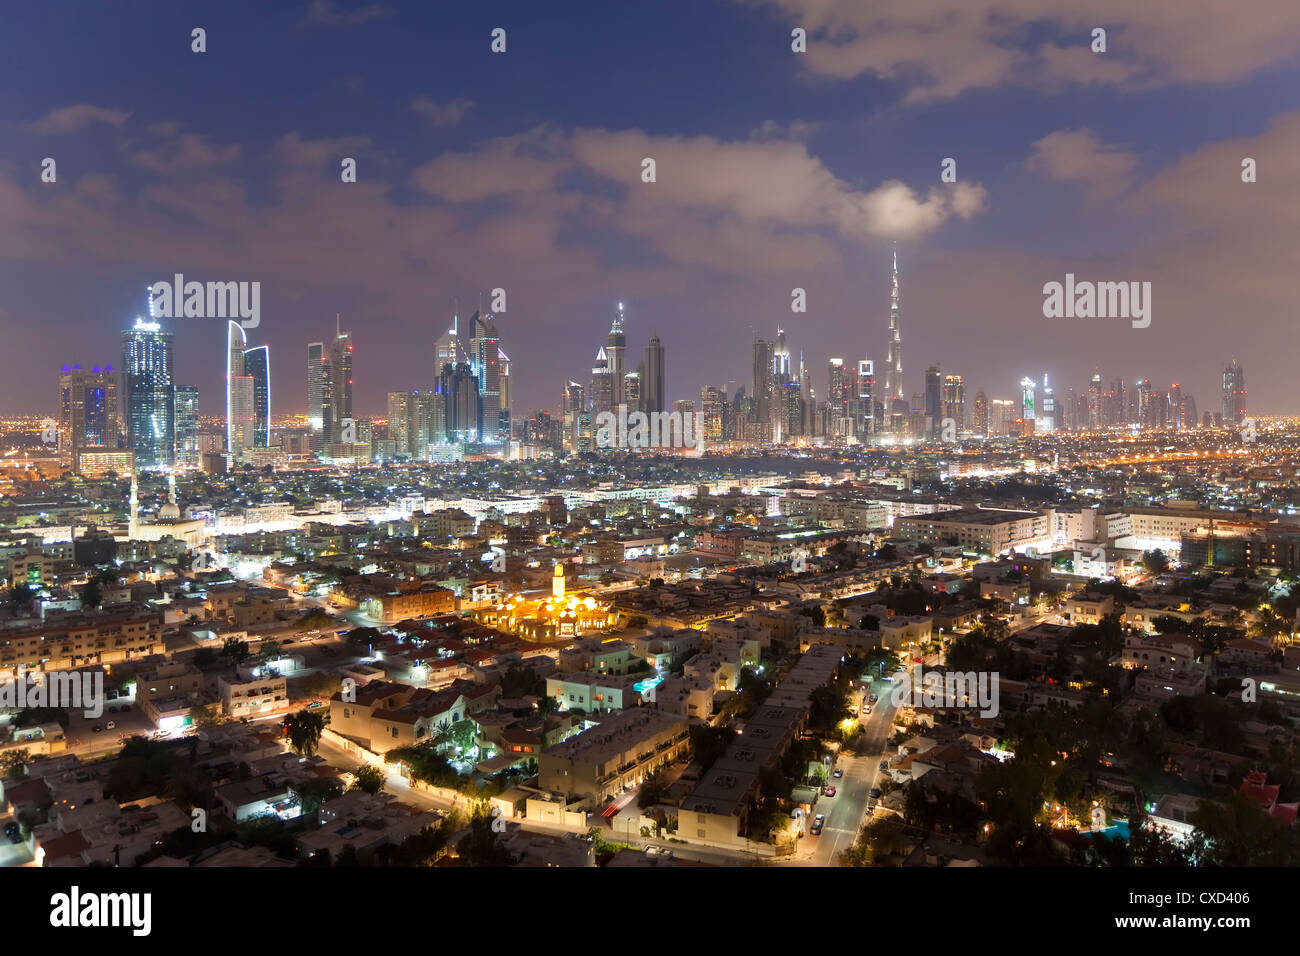 View of the new Dubai skyline of modern architecture and skyscrapers including the Burj Khalifa on Sheikh Zayed Road, Dubai Stock Photo